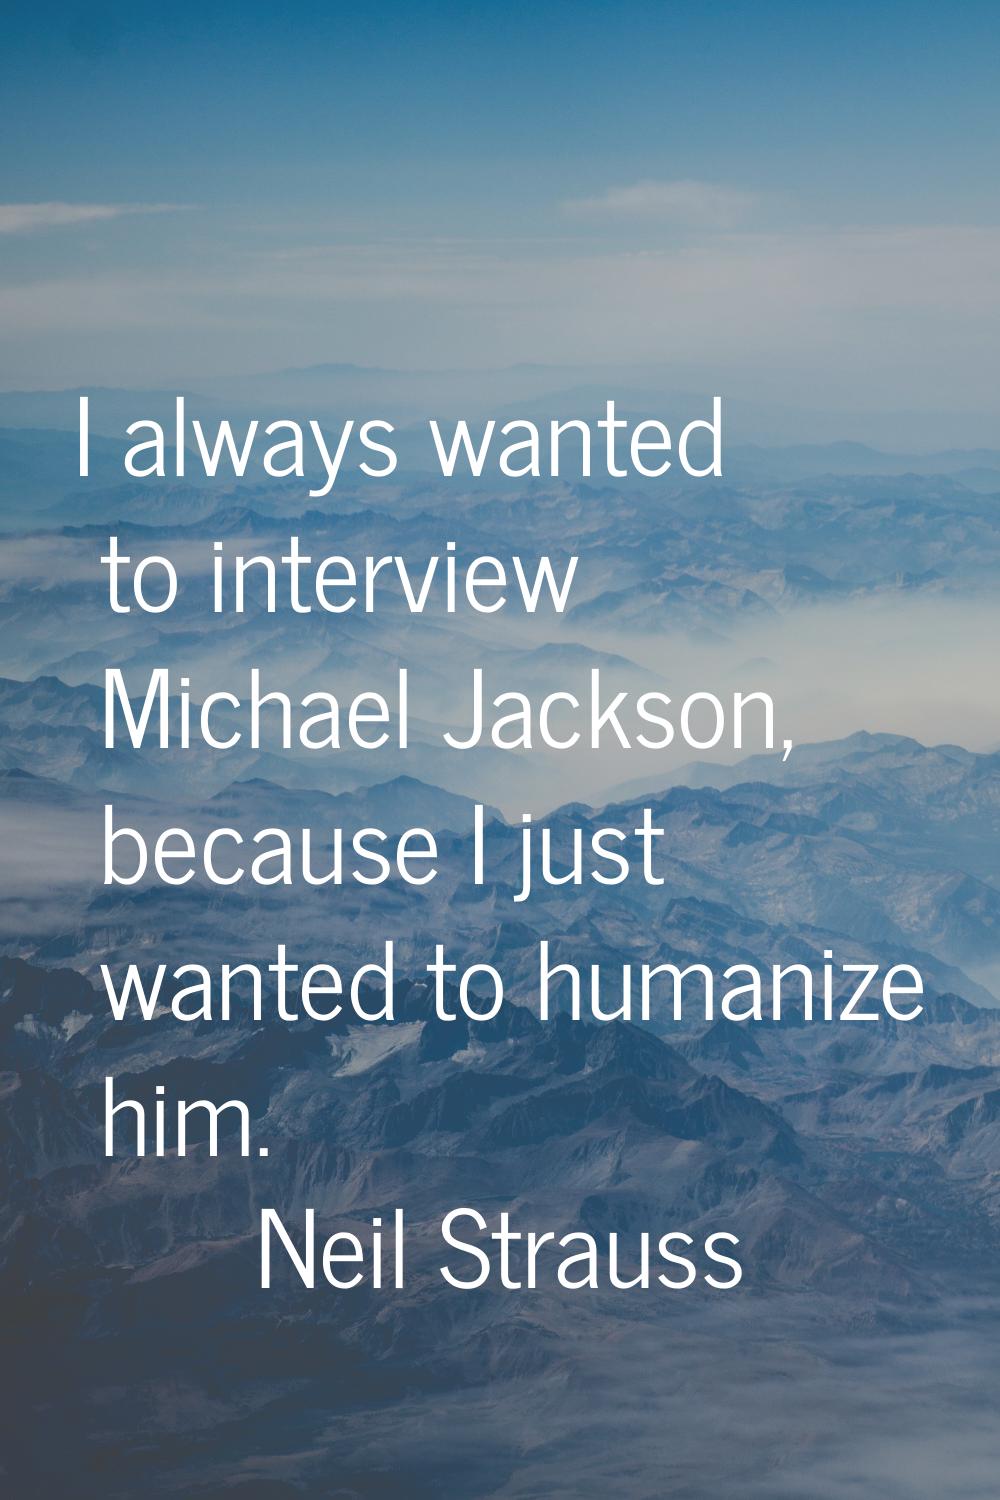 I always wanted to interview Michael Jackson, because I just wanted to humanize him.